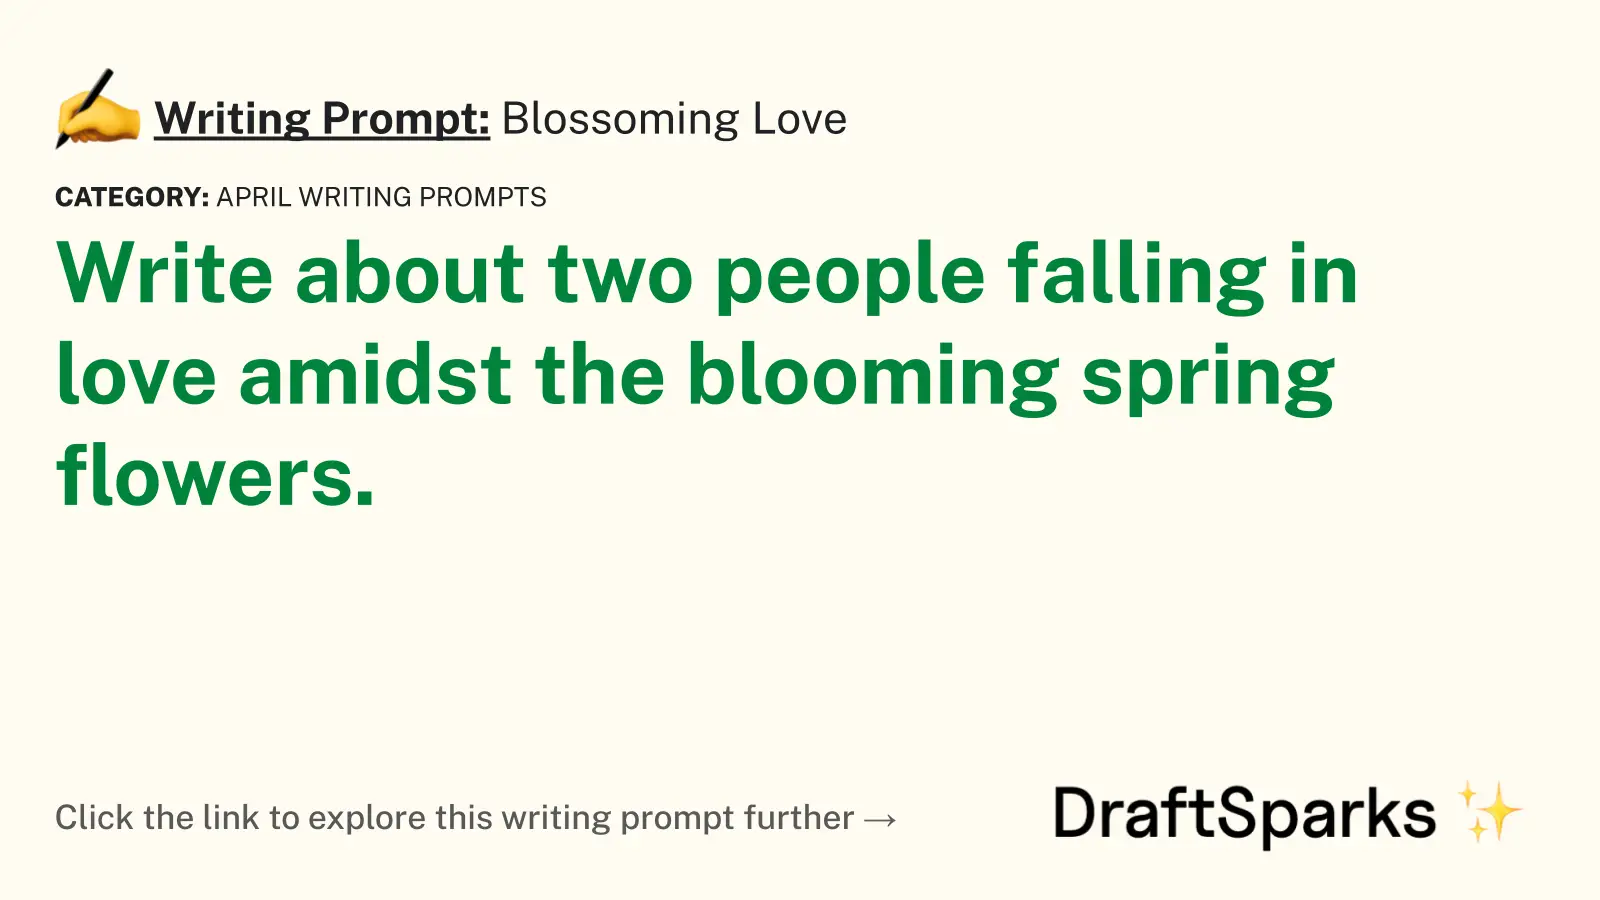 Blossoming Love